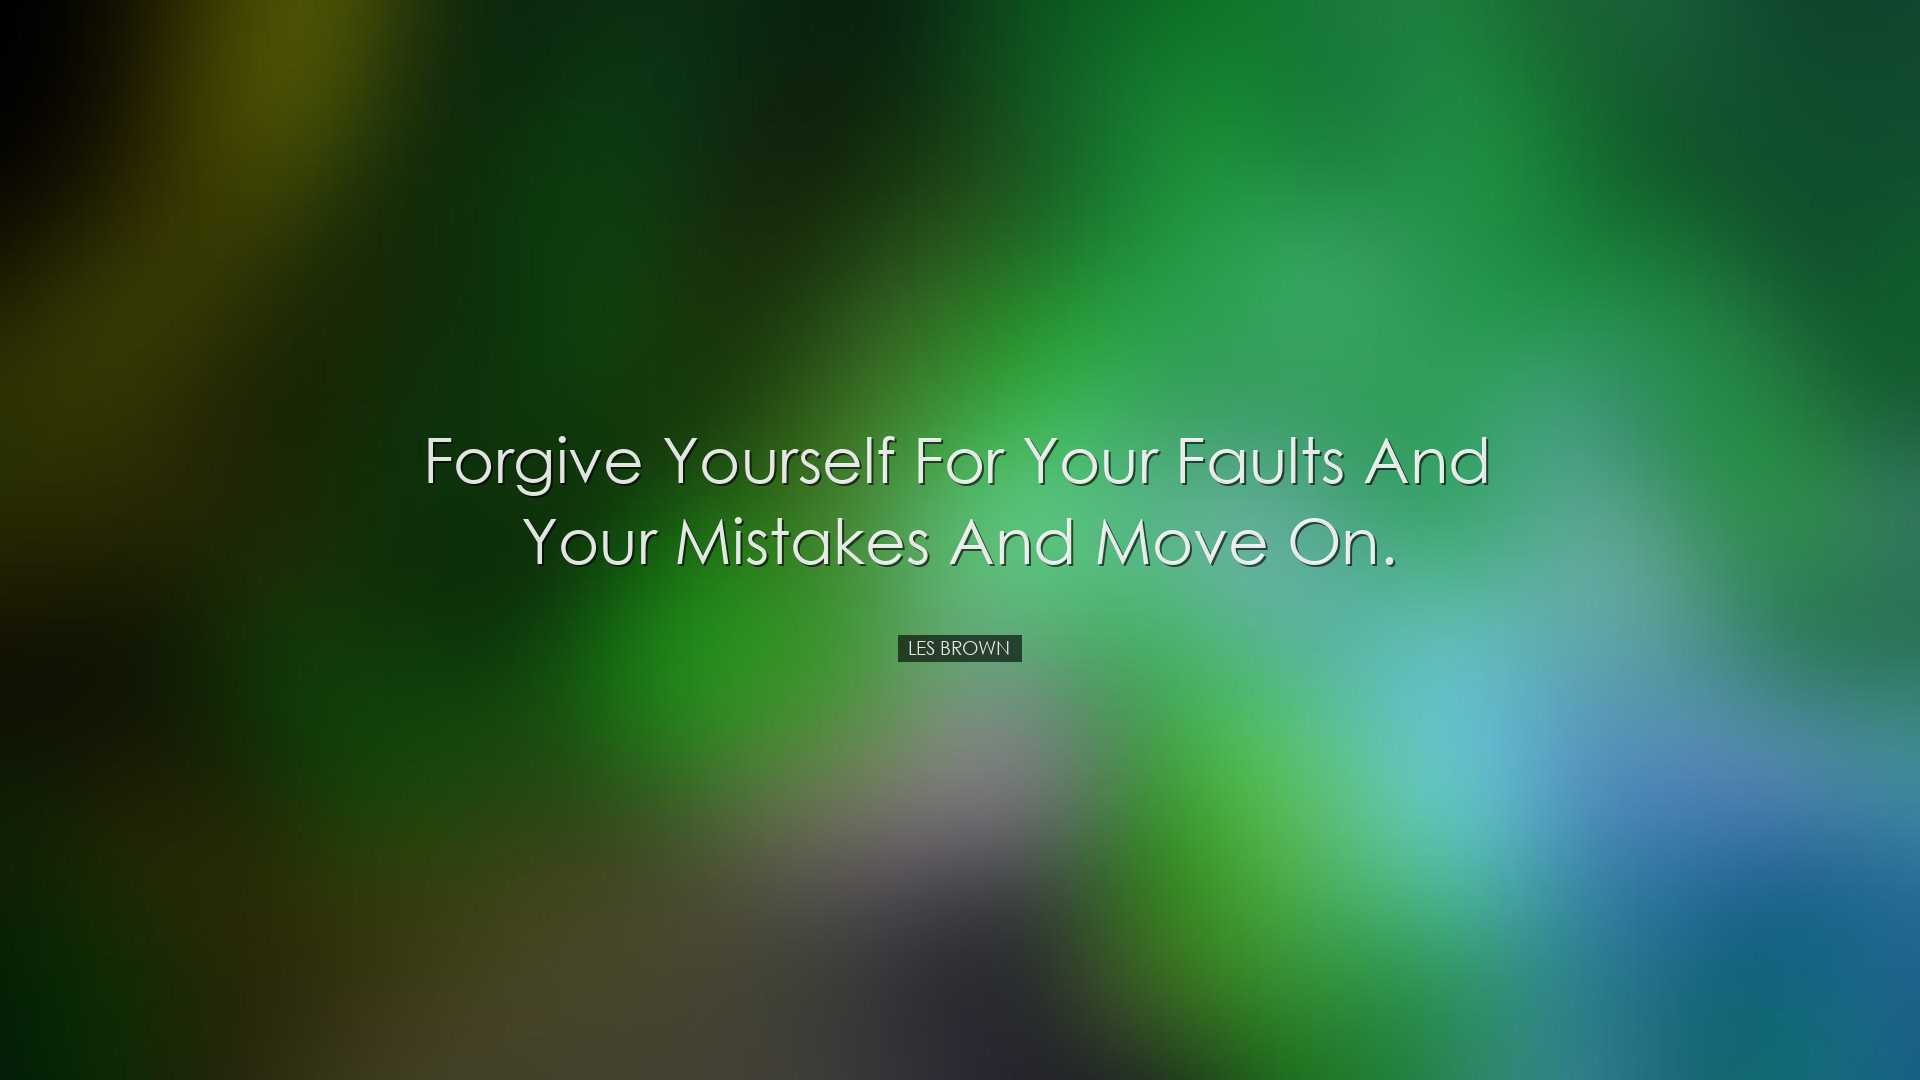 Forgive yourself for your faults and your mistakes and move on. -